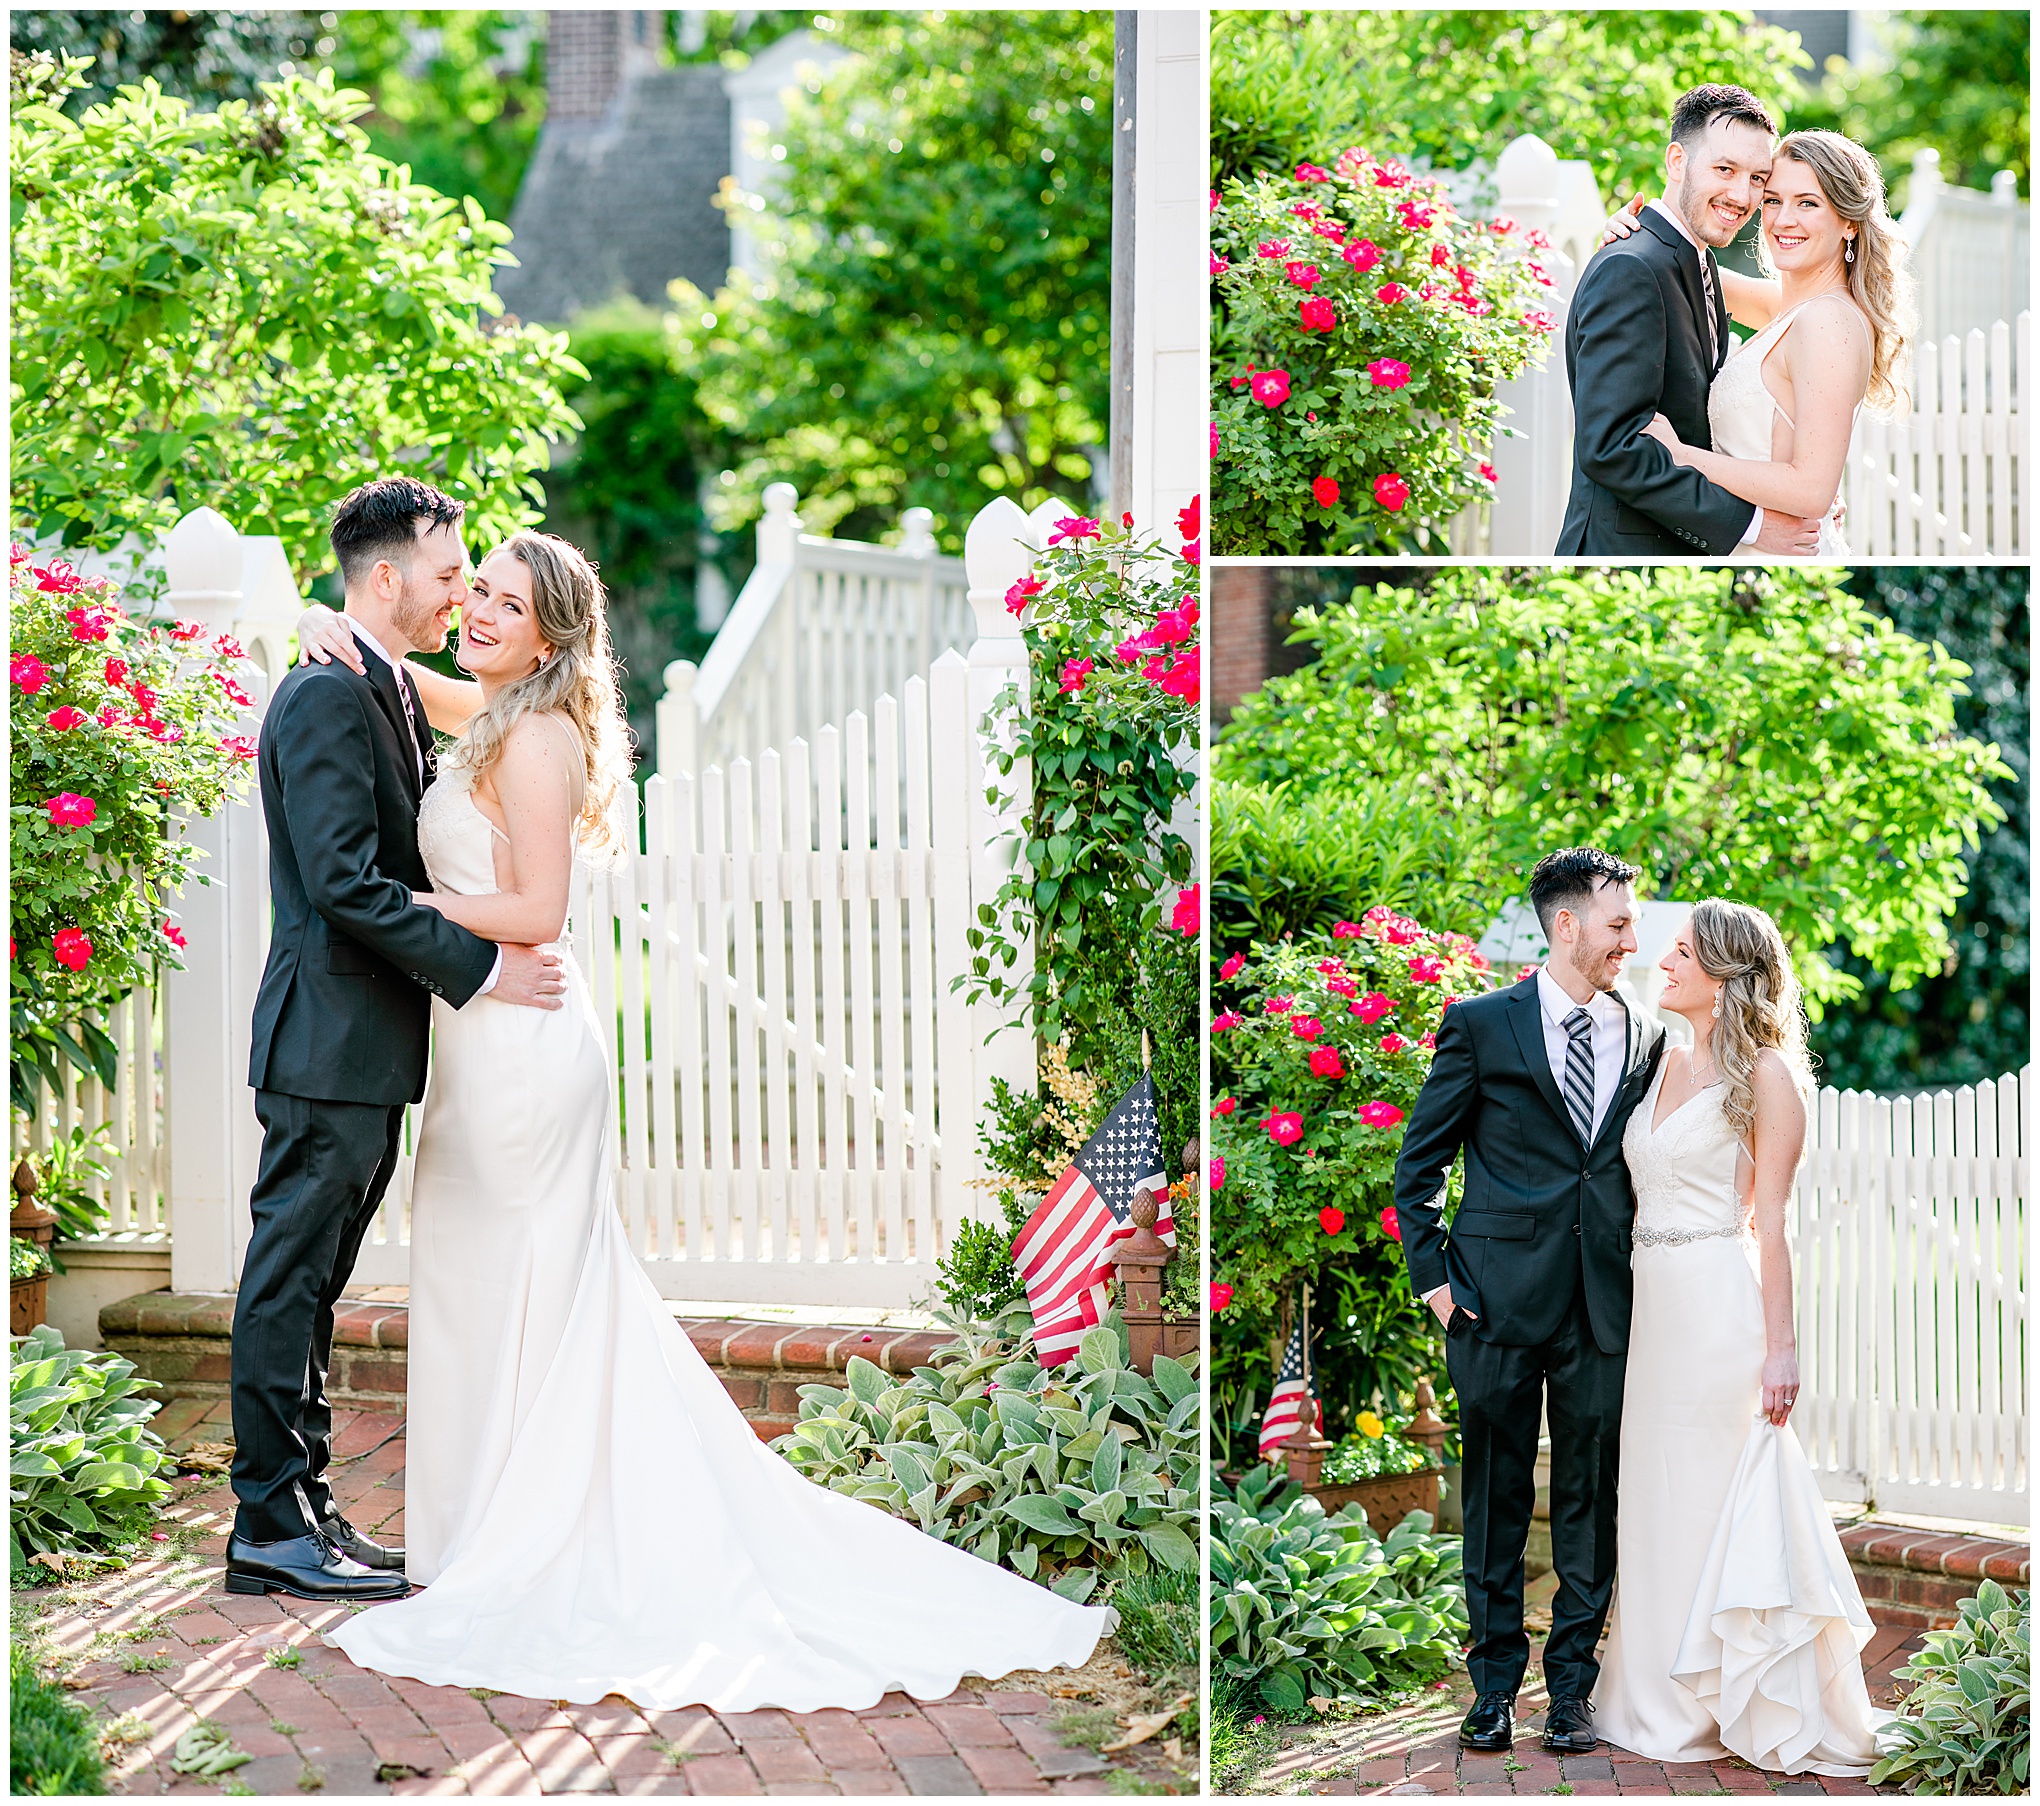 glowing spring Alexandria elopement, Alexandria wedding photographer, Old Town wedding photographer, Old Town Alexandria, Old Town wedding, spring wedding, DC area wedding, DC wedding photographer, Rachel E.H. Photography, classic bride and groom, newlywed portraits